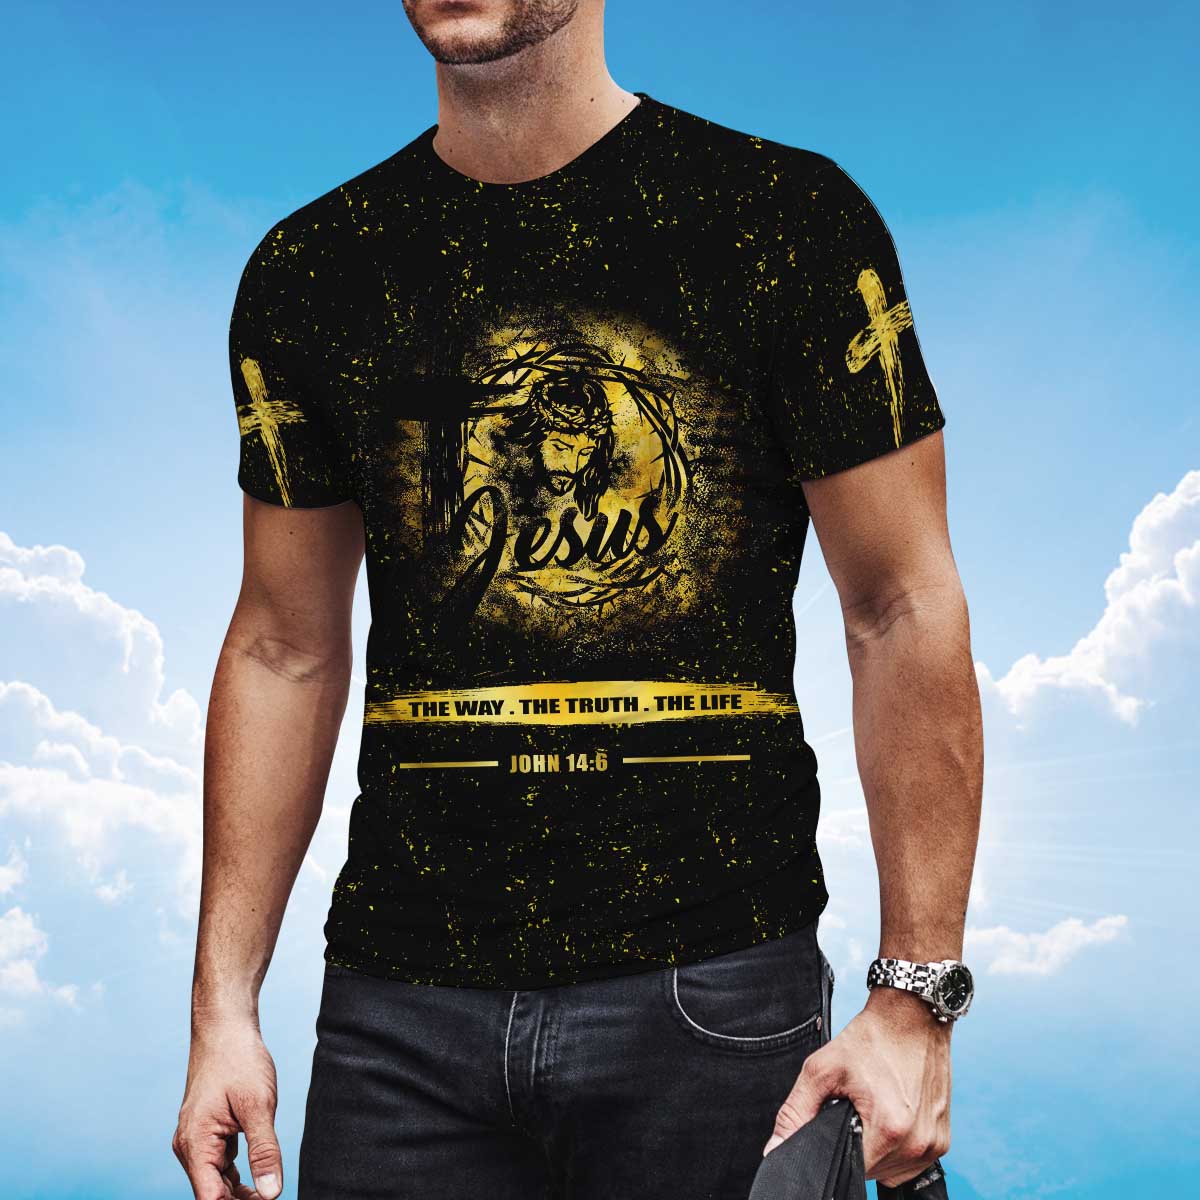 Cool 3D Shirt For Jesus Lover Jesus The Way The Truth The Life T Shirt